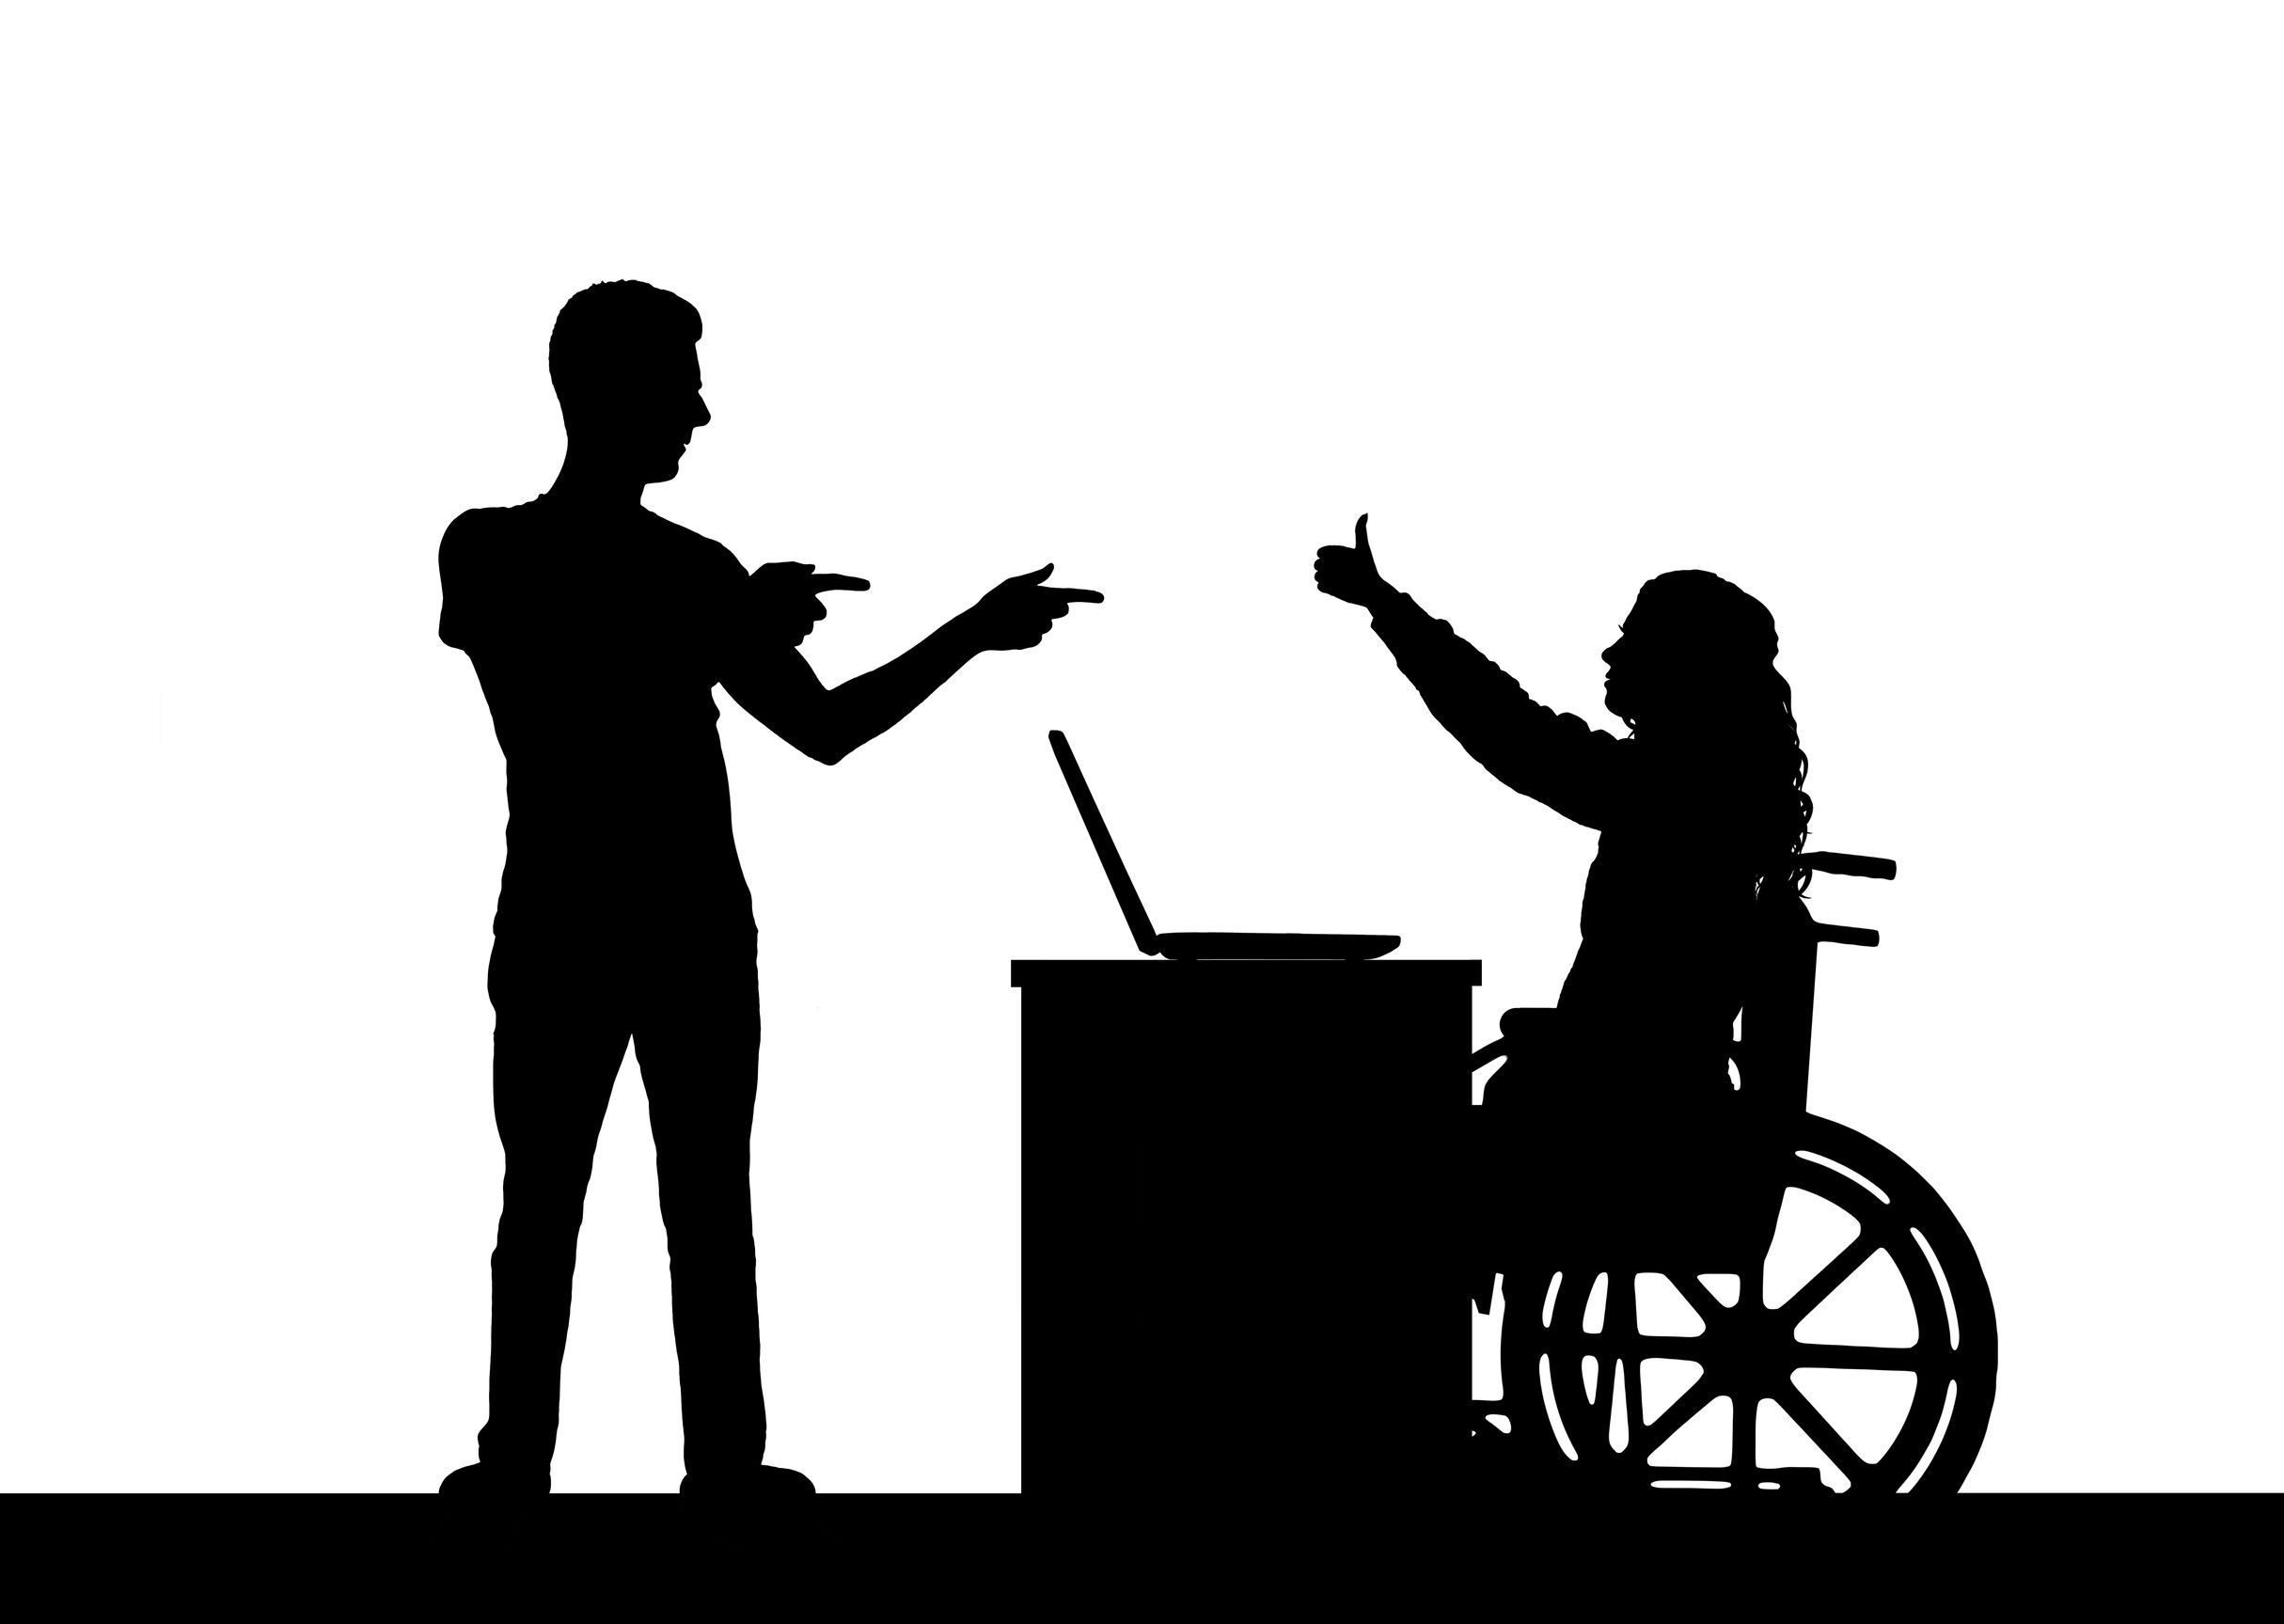 Silhouette of a man giving thumbs up to a co-worker with disability